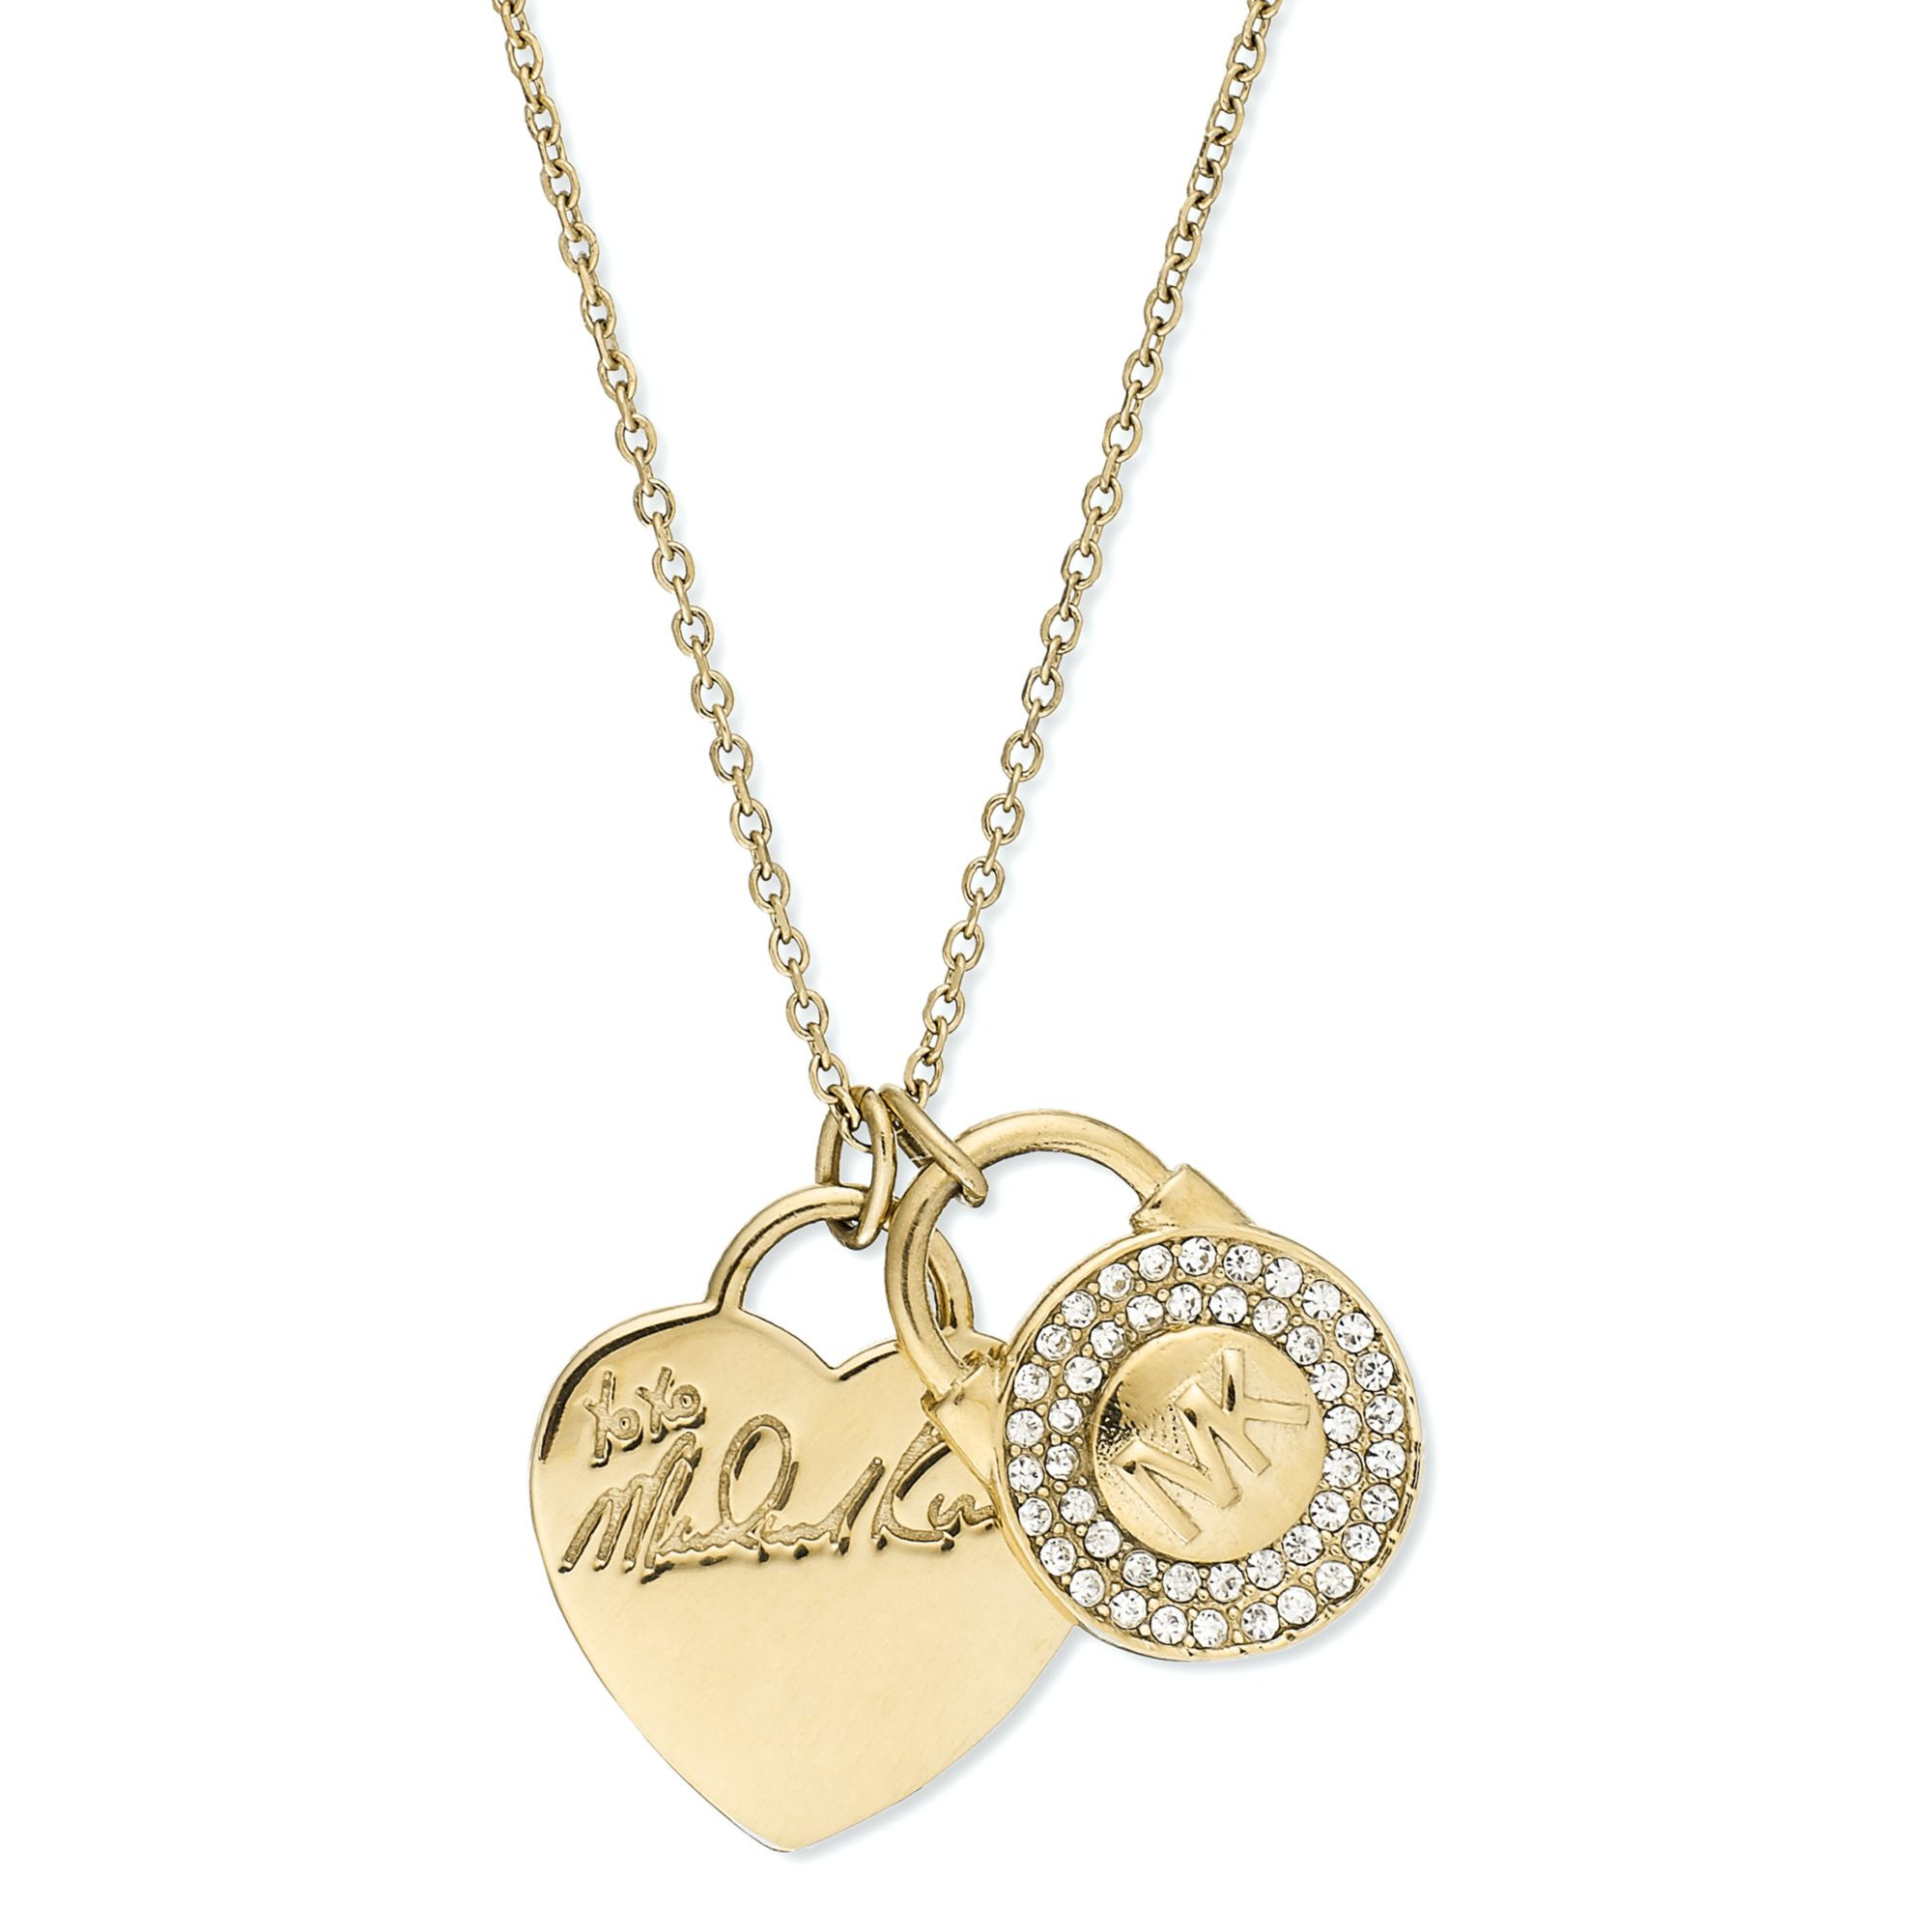 Michael Kors Necklaces
 Michael Kors Goldtone Heart and Pave Lock Charm Necklace A